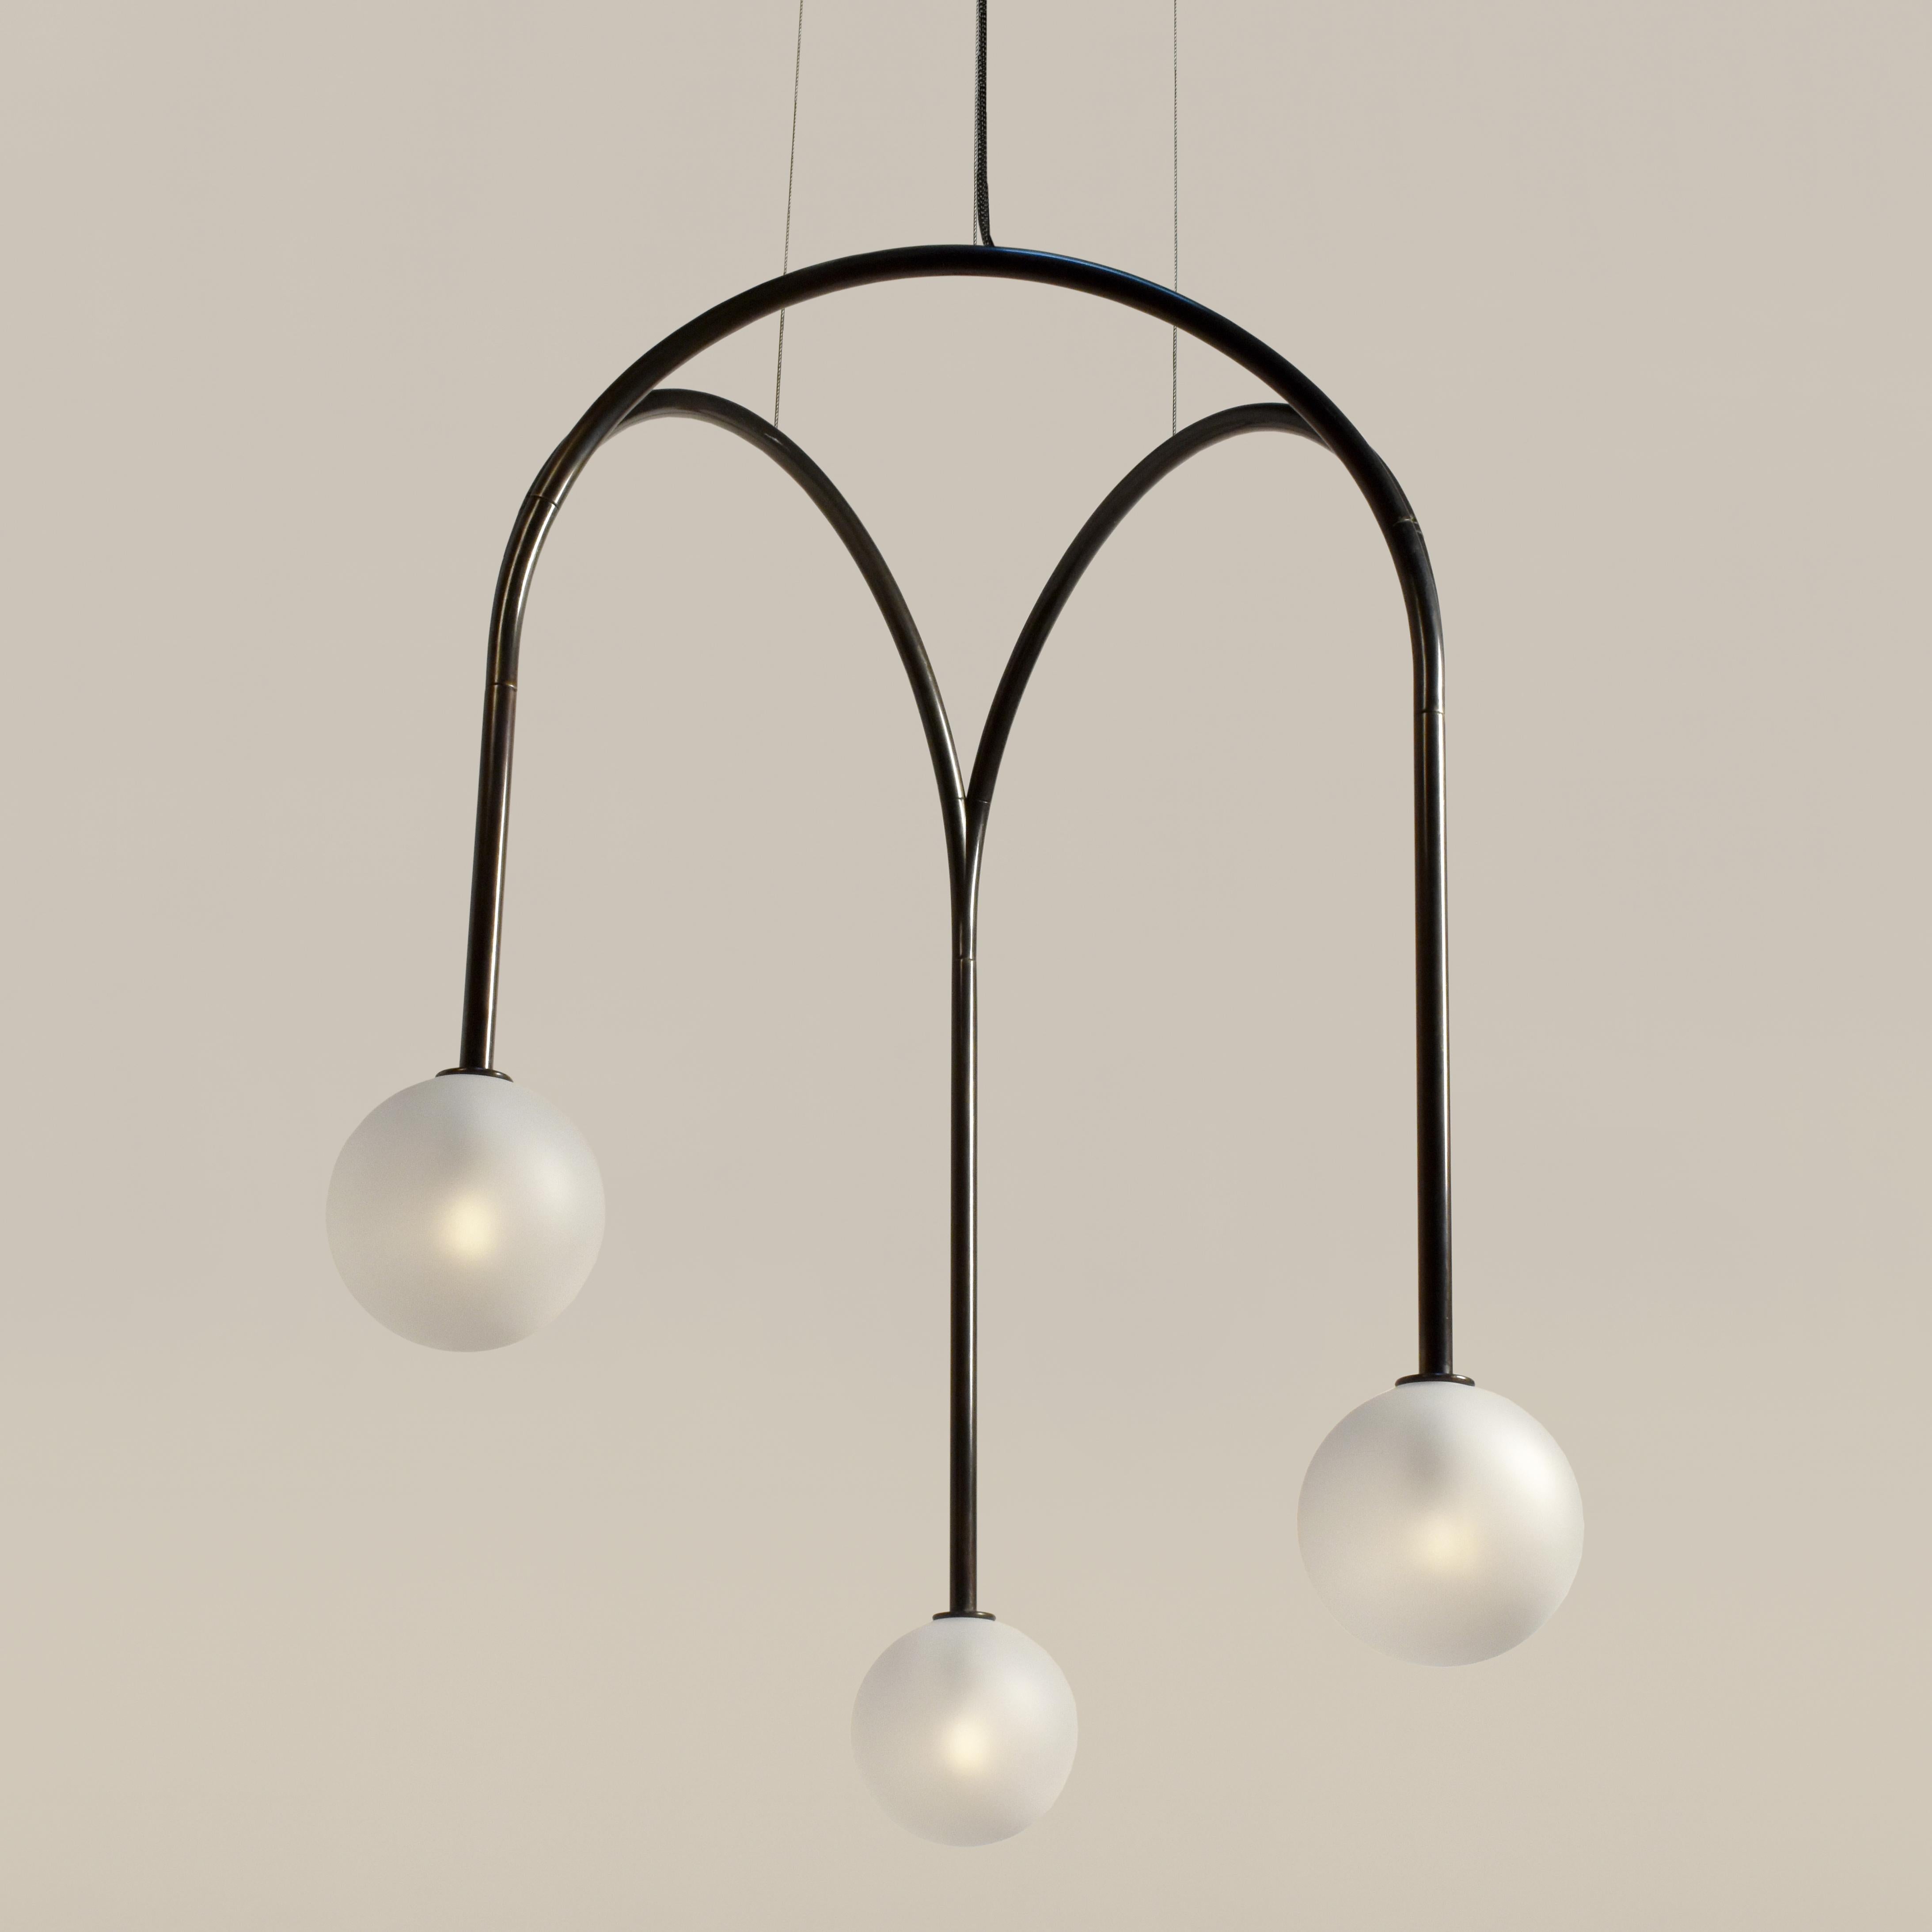 Modular lighting designed and produced by Talbot & Yoon.

The Rib Vault Light recalls architectural rib-vaults which outline the contours of a decorative ceiling or framed a preventive dome in church architecture. In the Vault Light, the form has